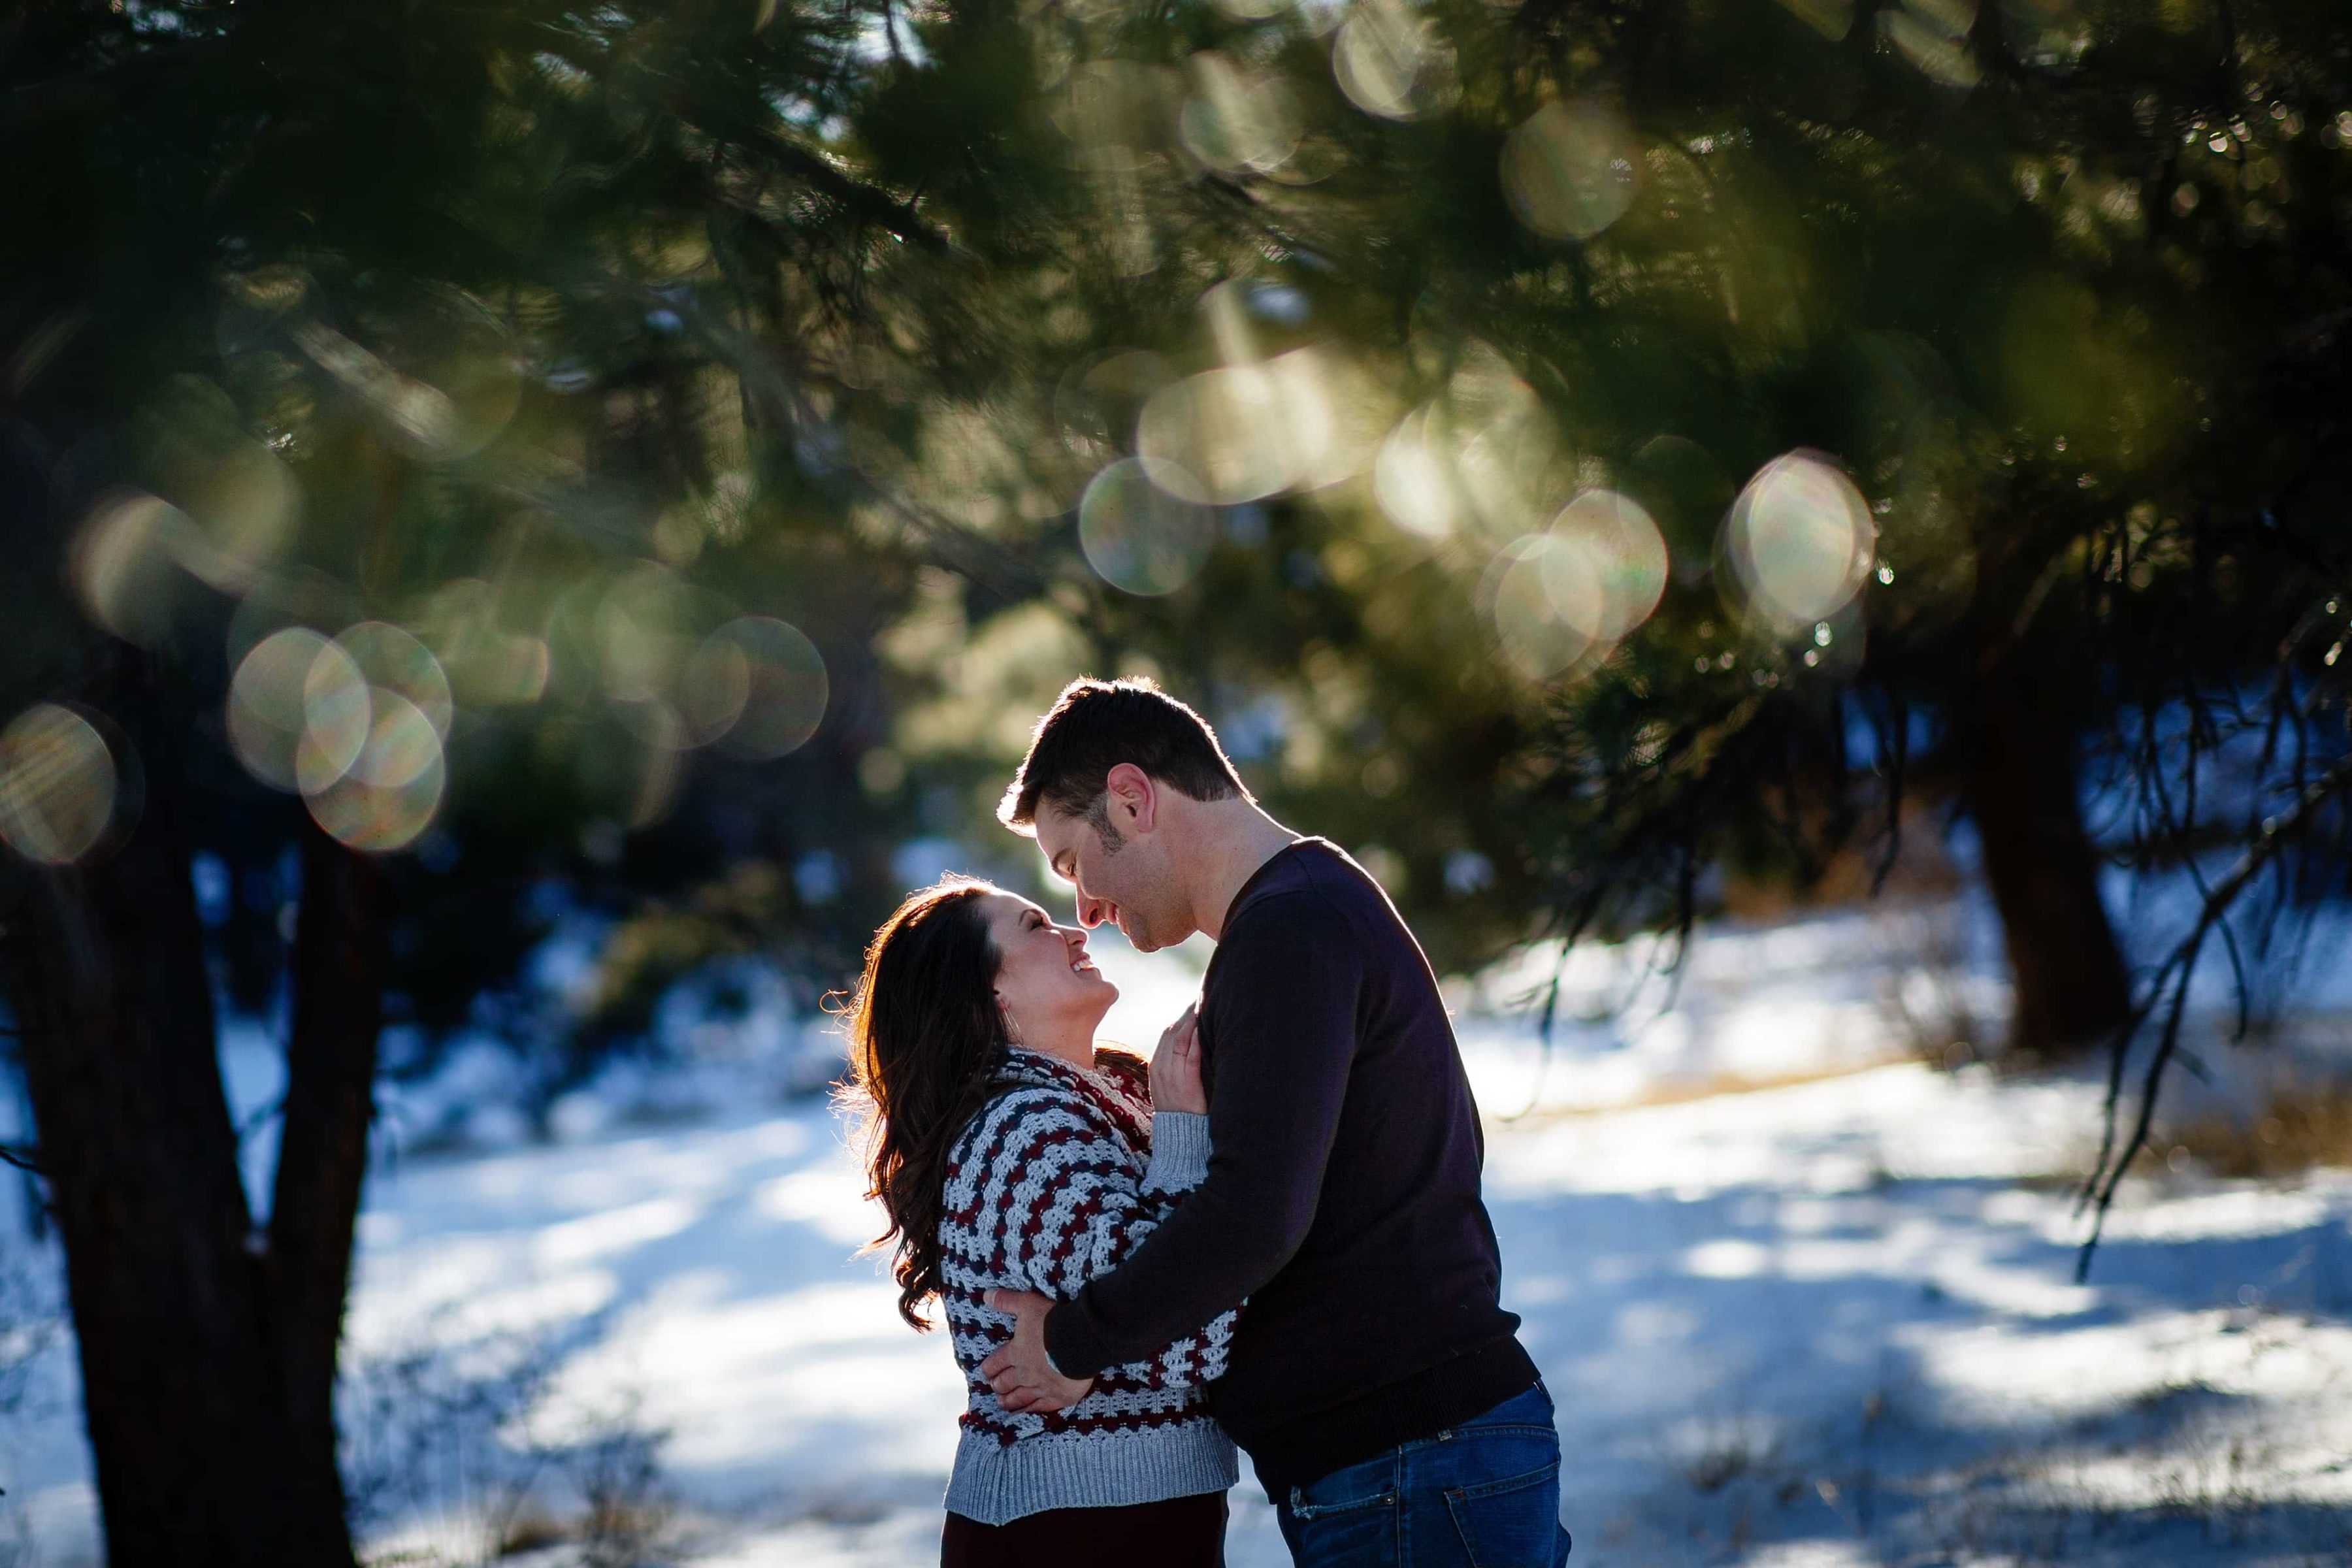 Melissa and Jordan embrage during their Elk Meadow Park winter engagement session near Evergreen, Colorado